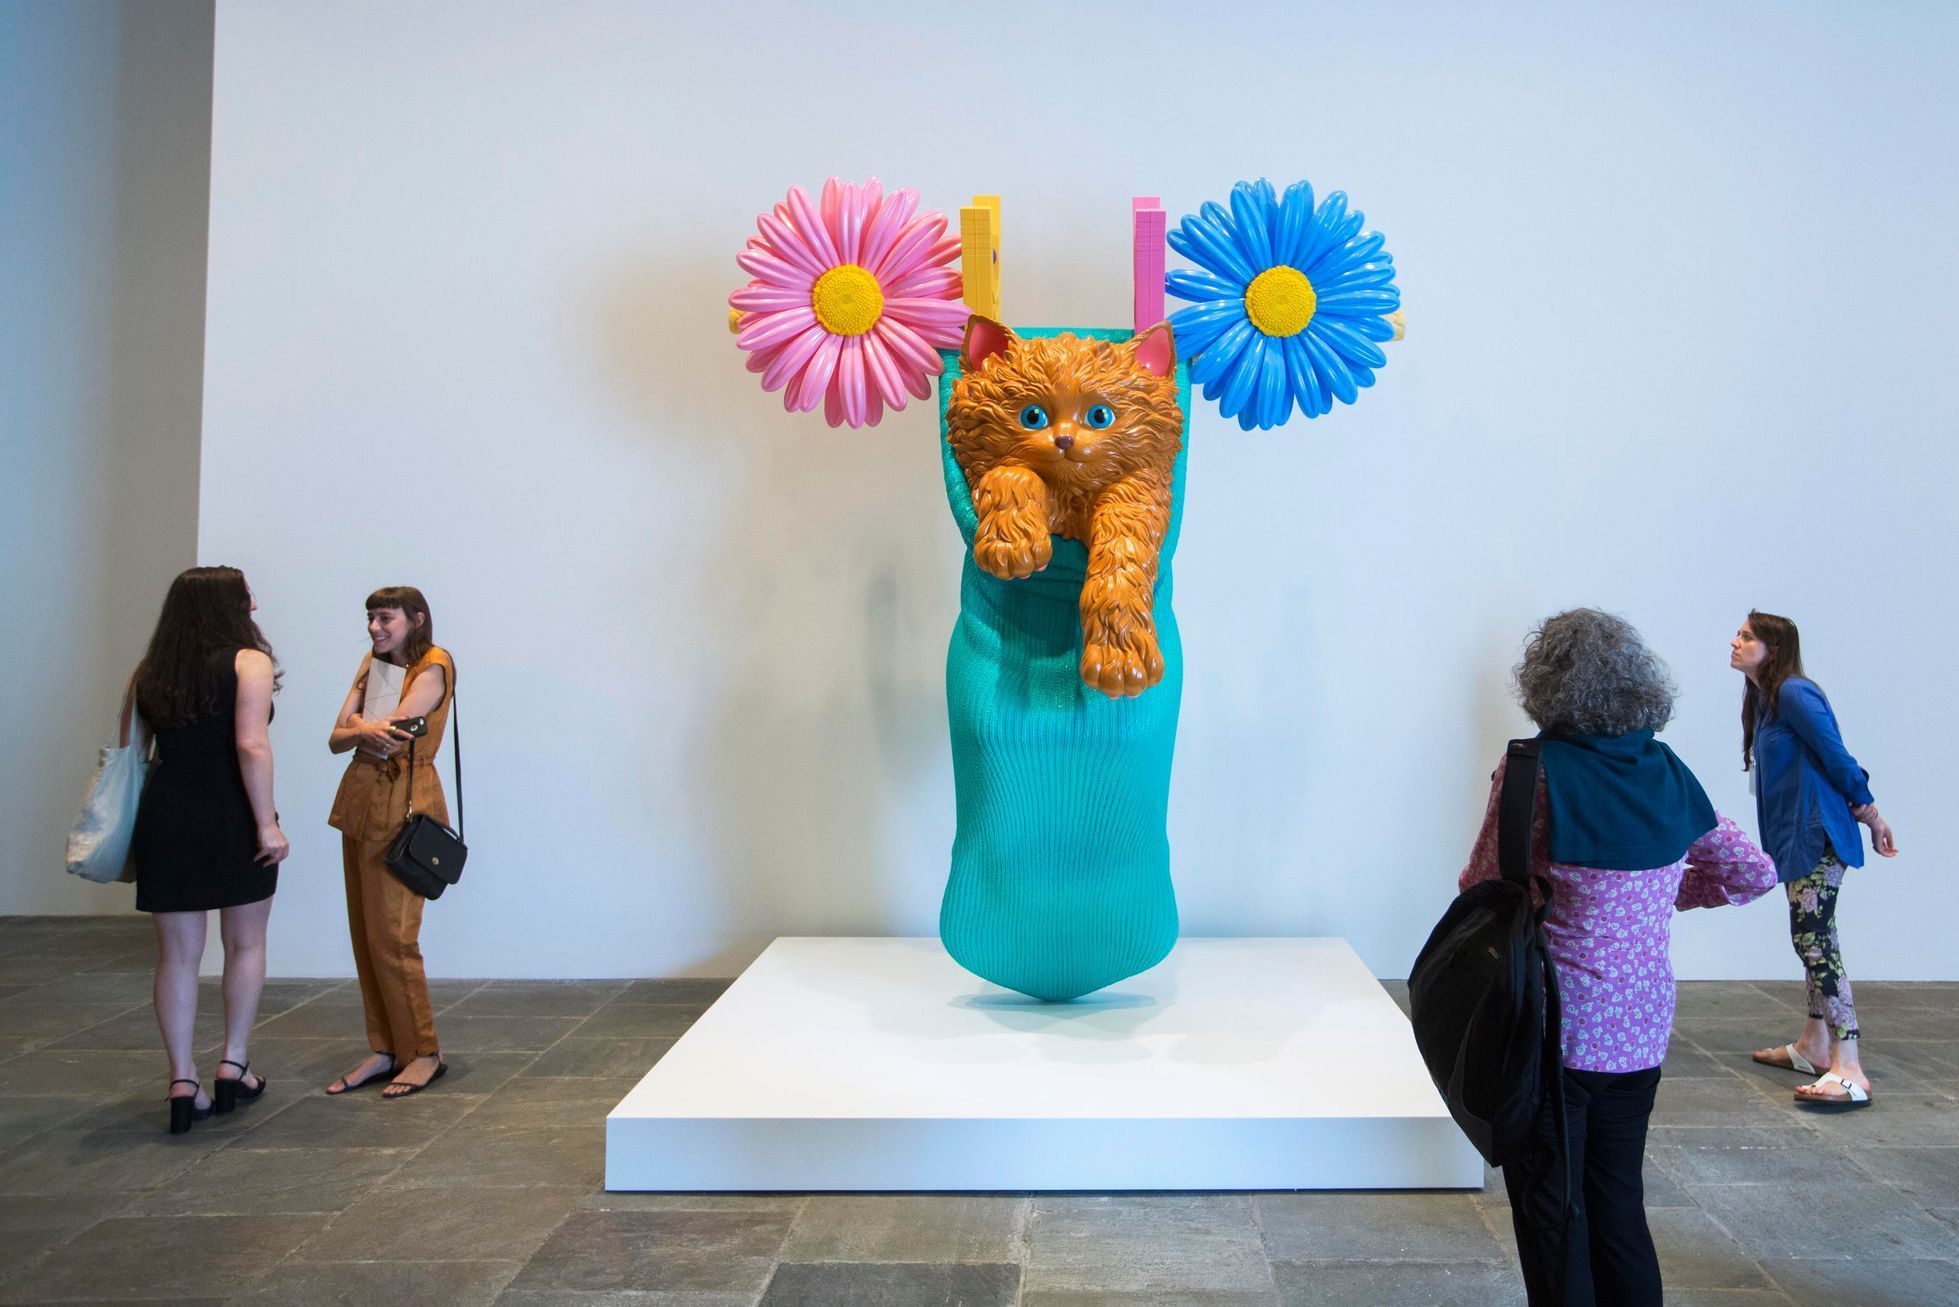 Journalists look at a sculpture before the opening of a Jeff Koons retrospective at the Whitney Museum of American Art in New York